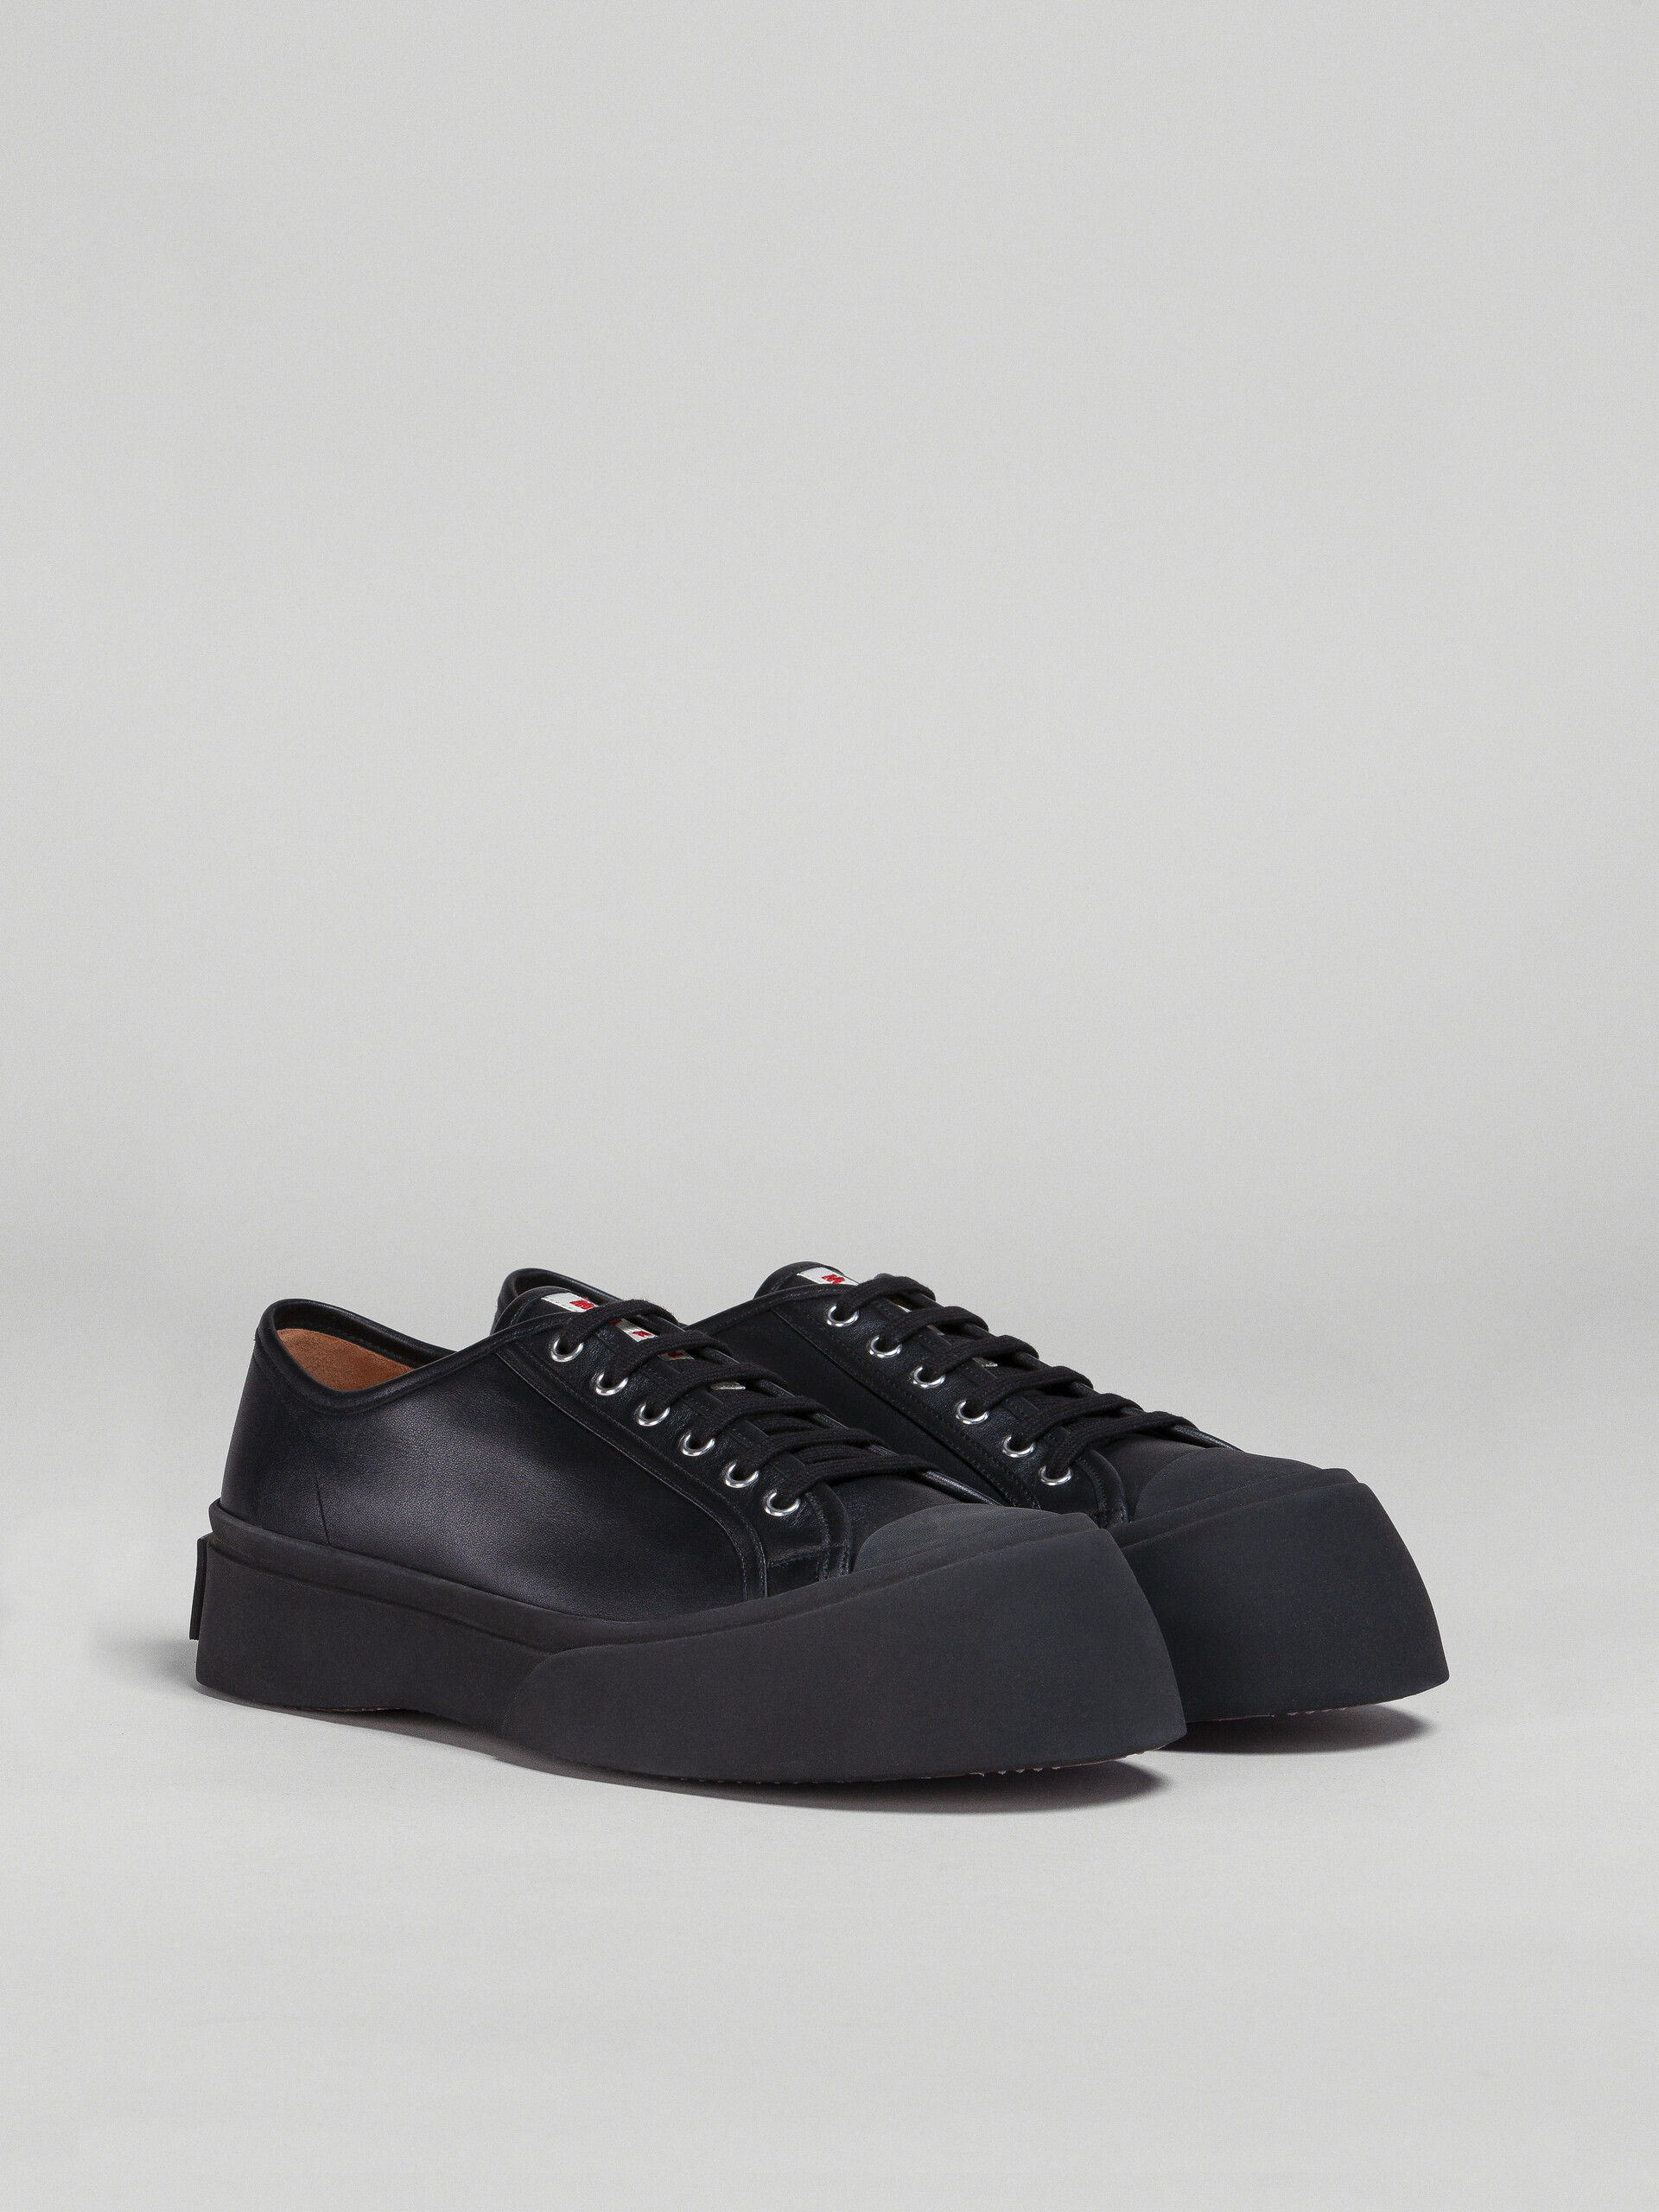 Soft calf leather PABLO sneaker - Sneakers - Image 2